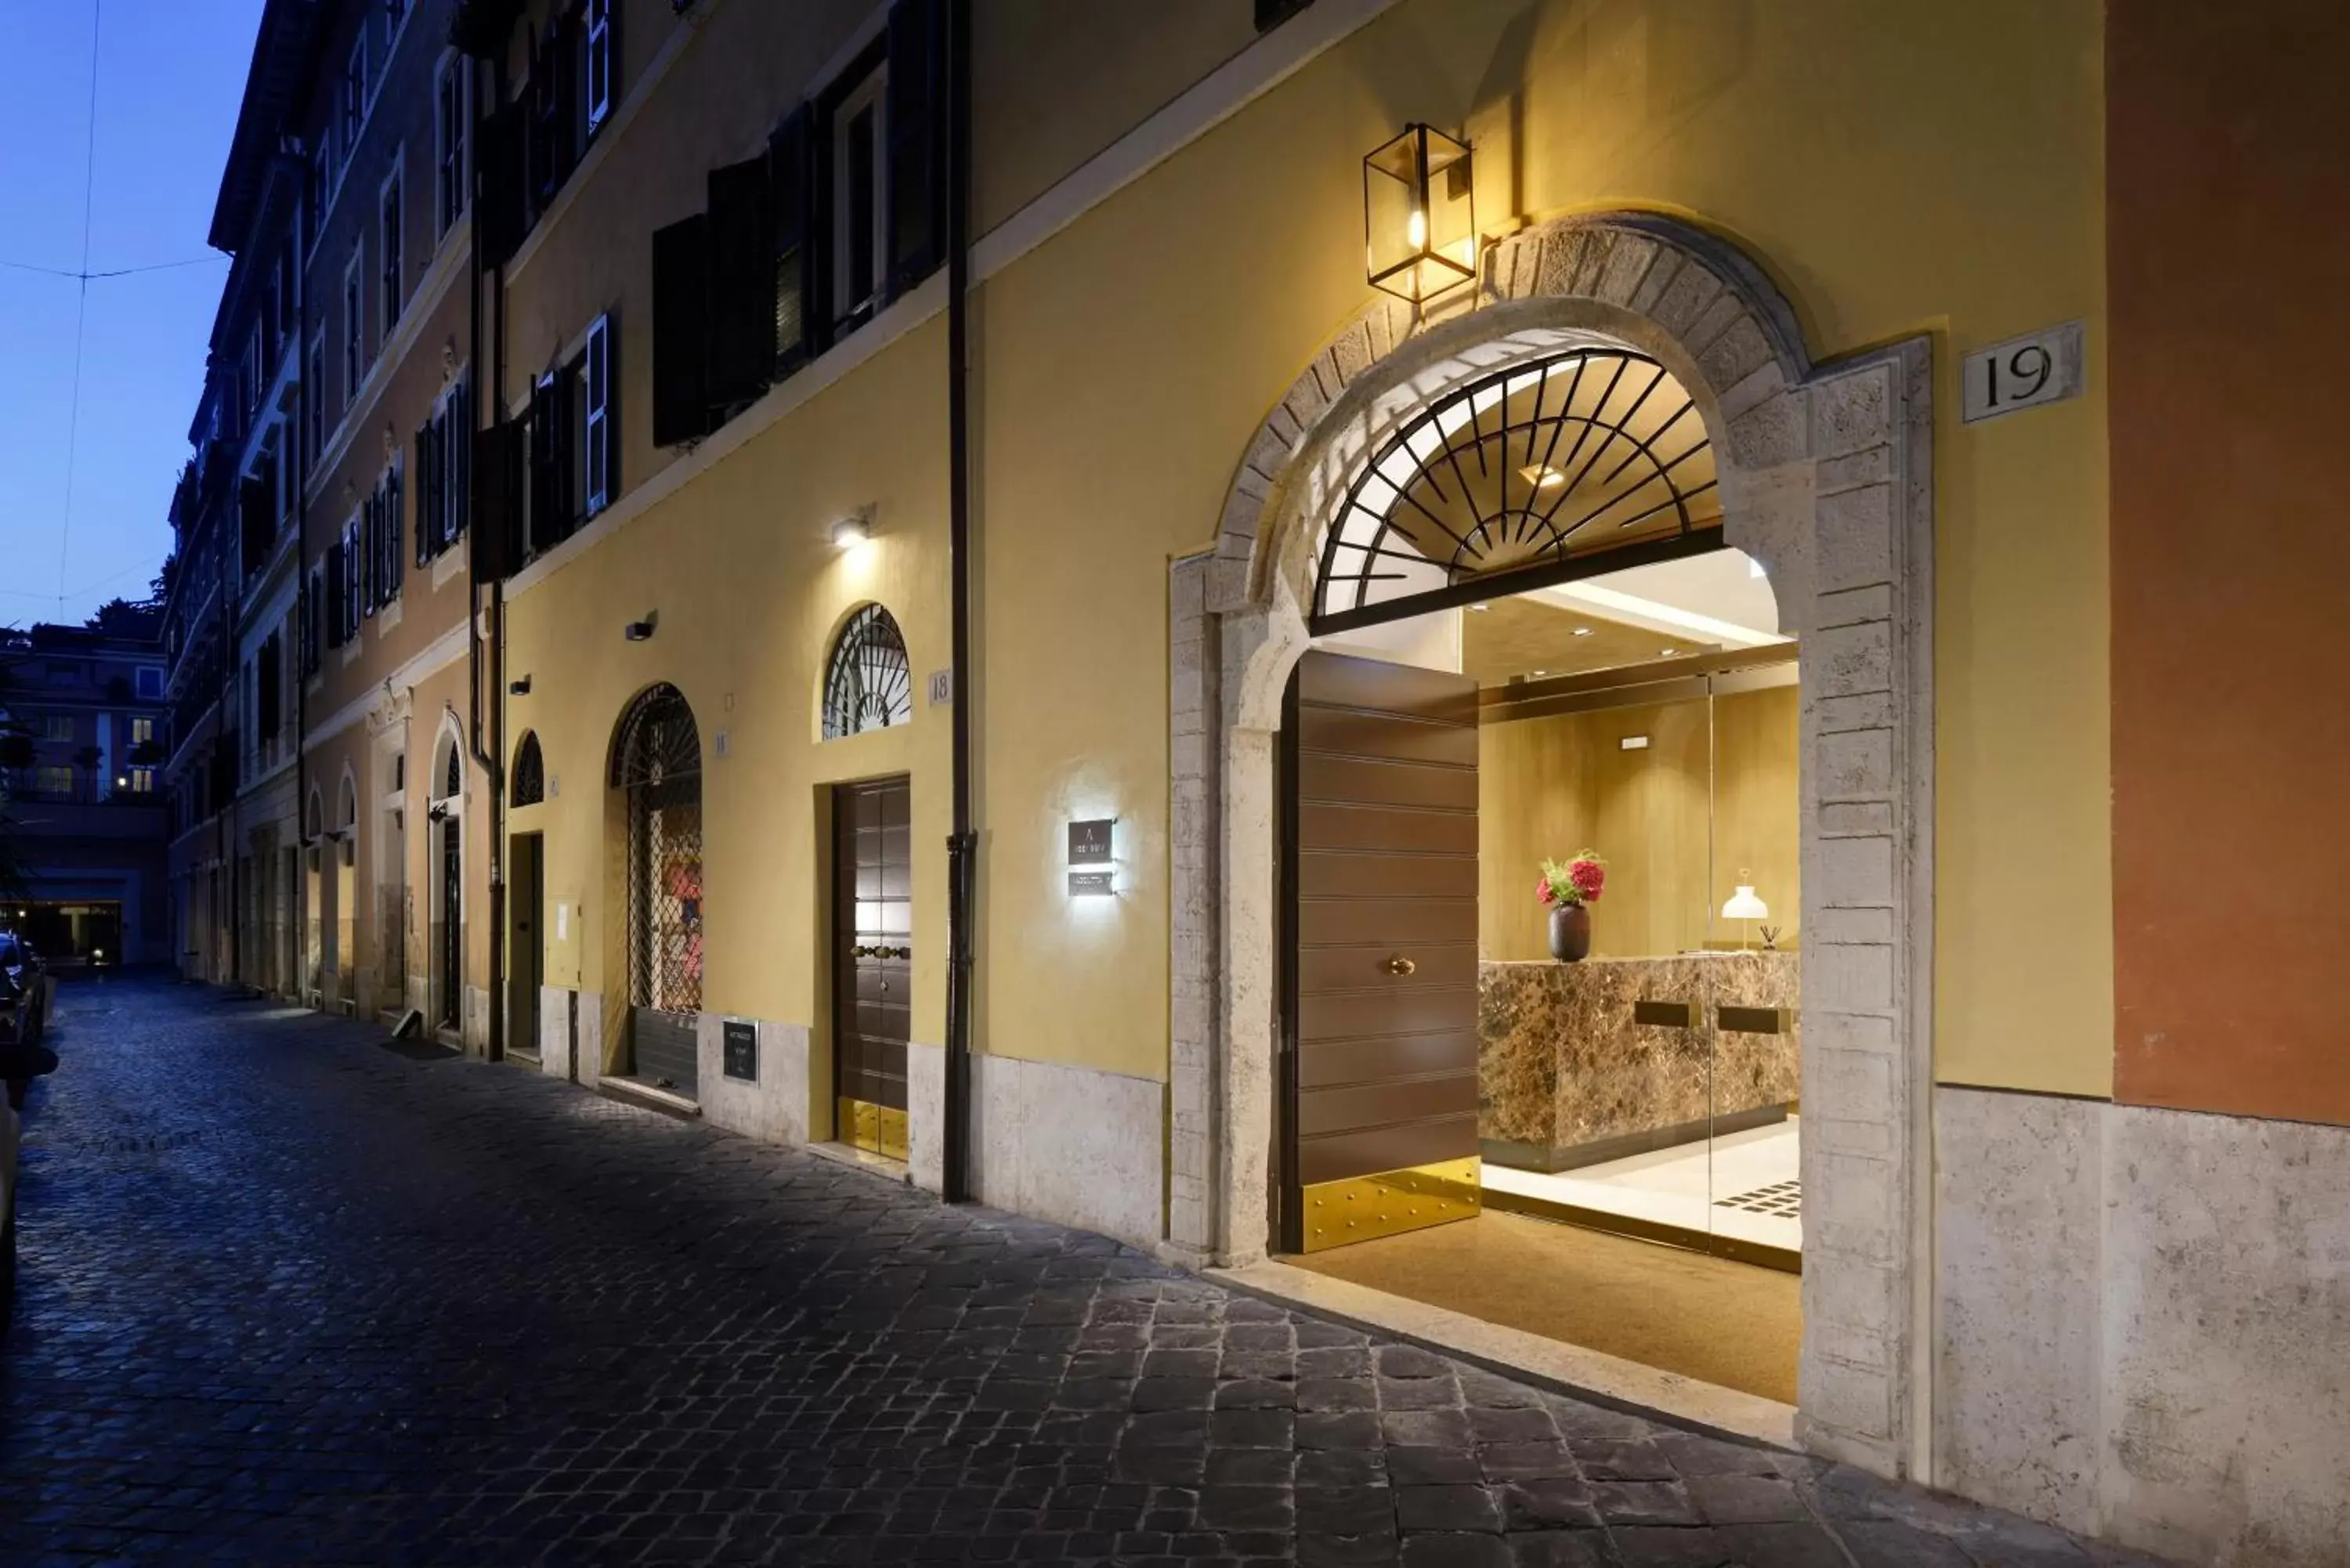 Property building in Margutta 19 - Small Luxury Hotels of the World